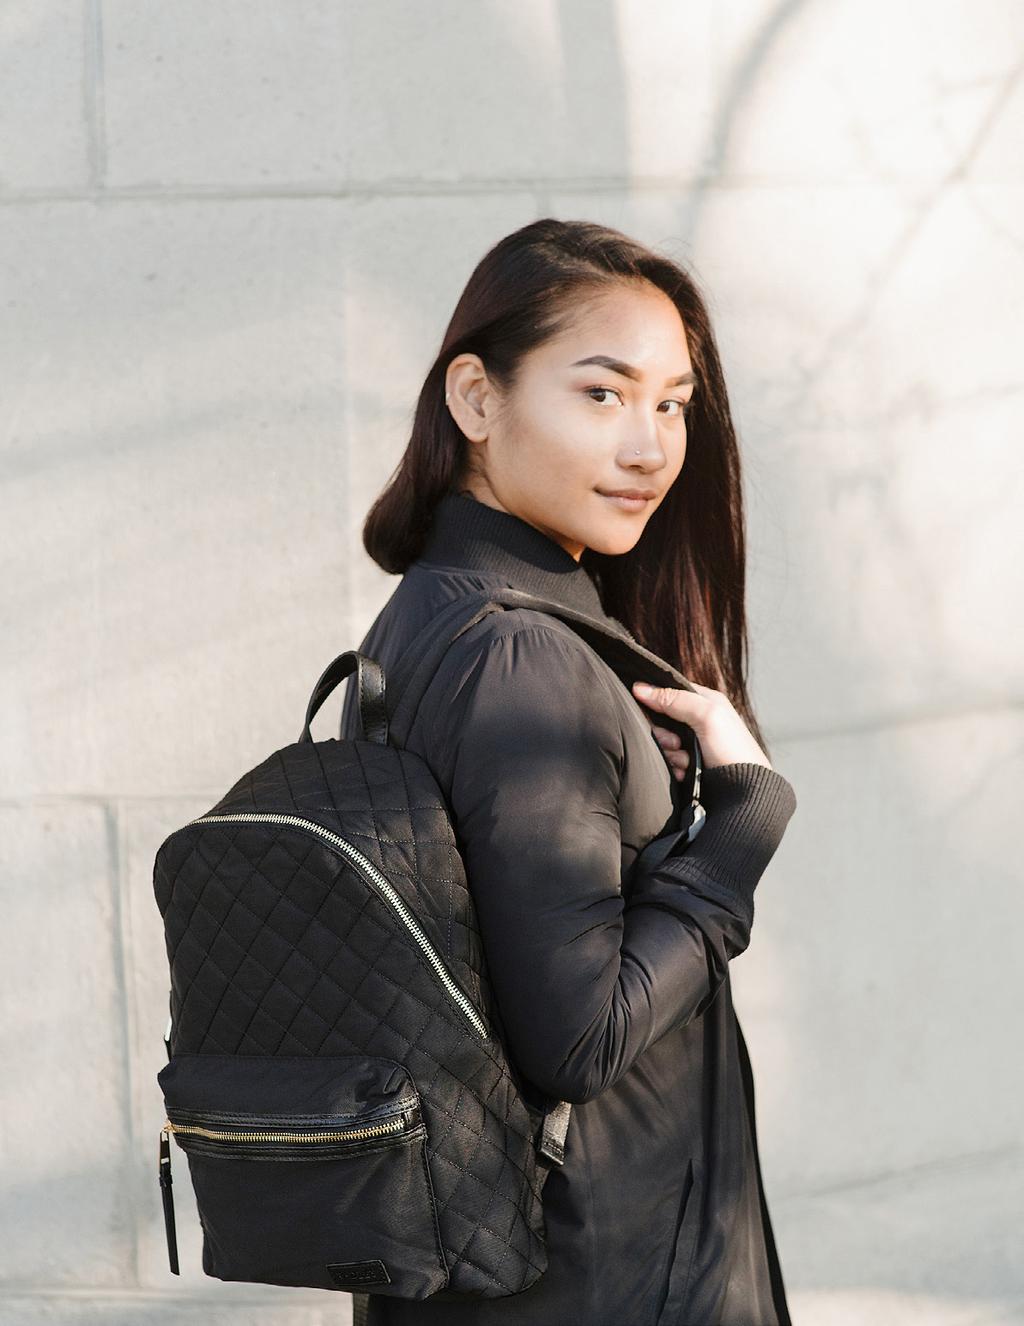 Fashion meets function RADLEY s Quilted Backpack fits all the essentials, is terrific